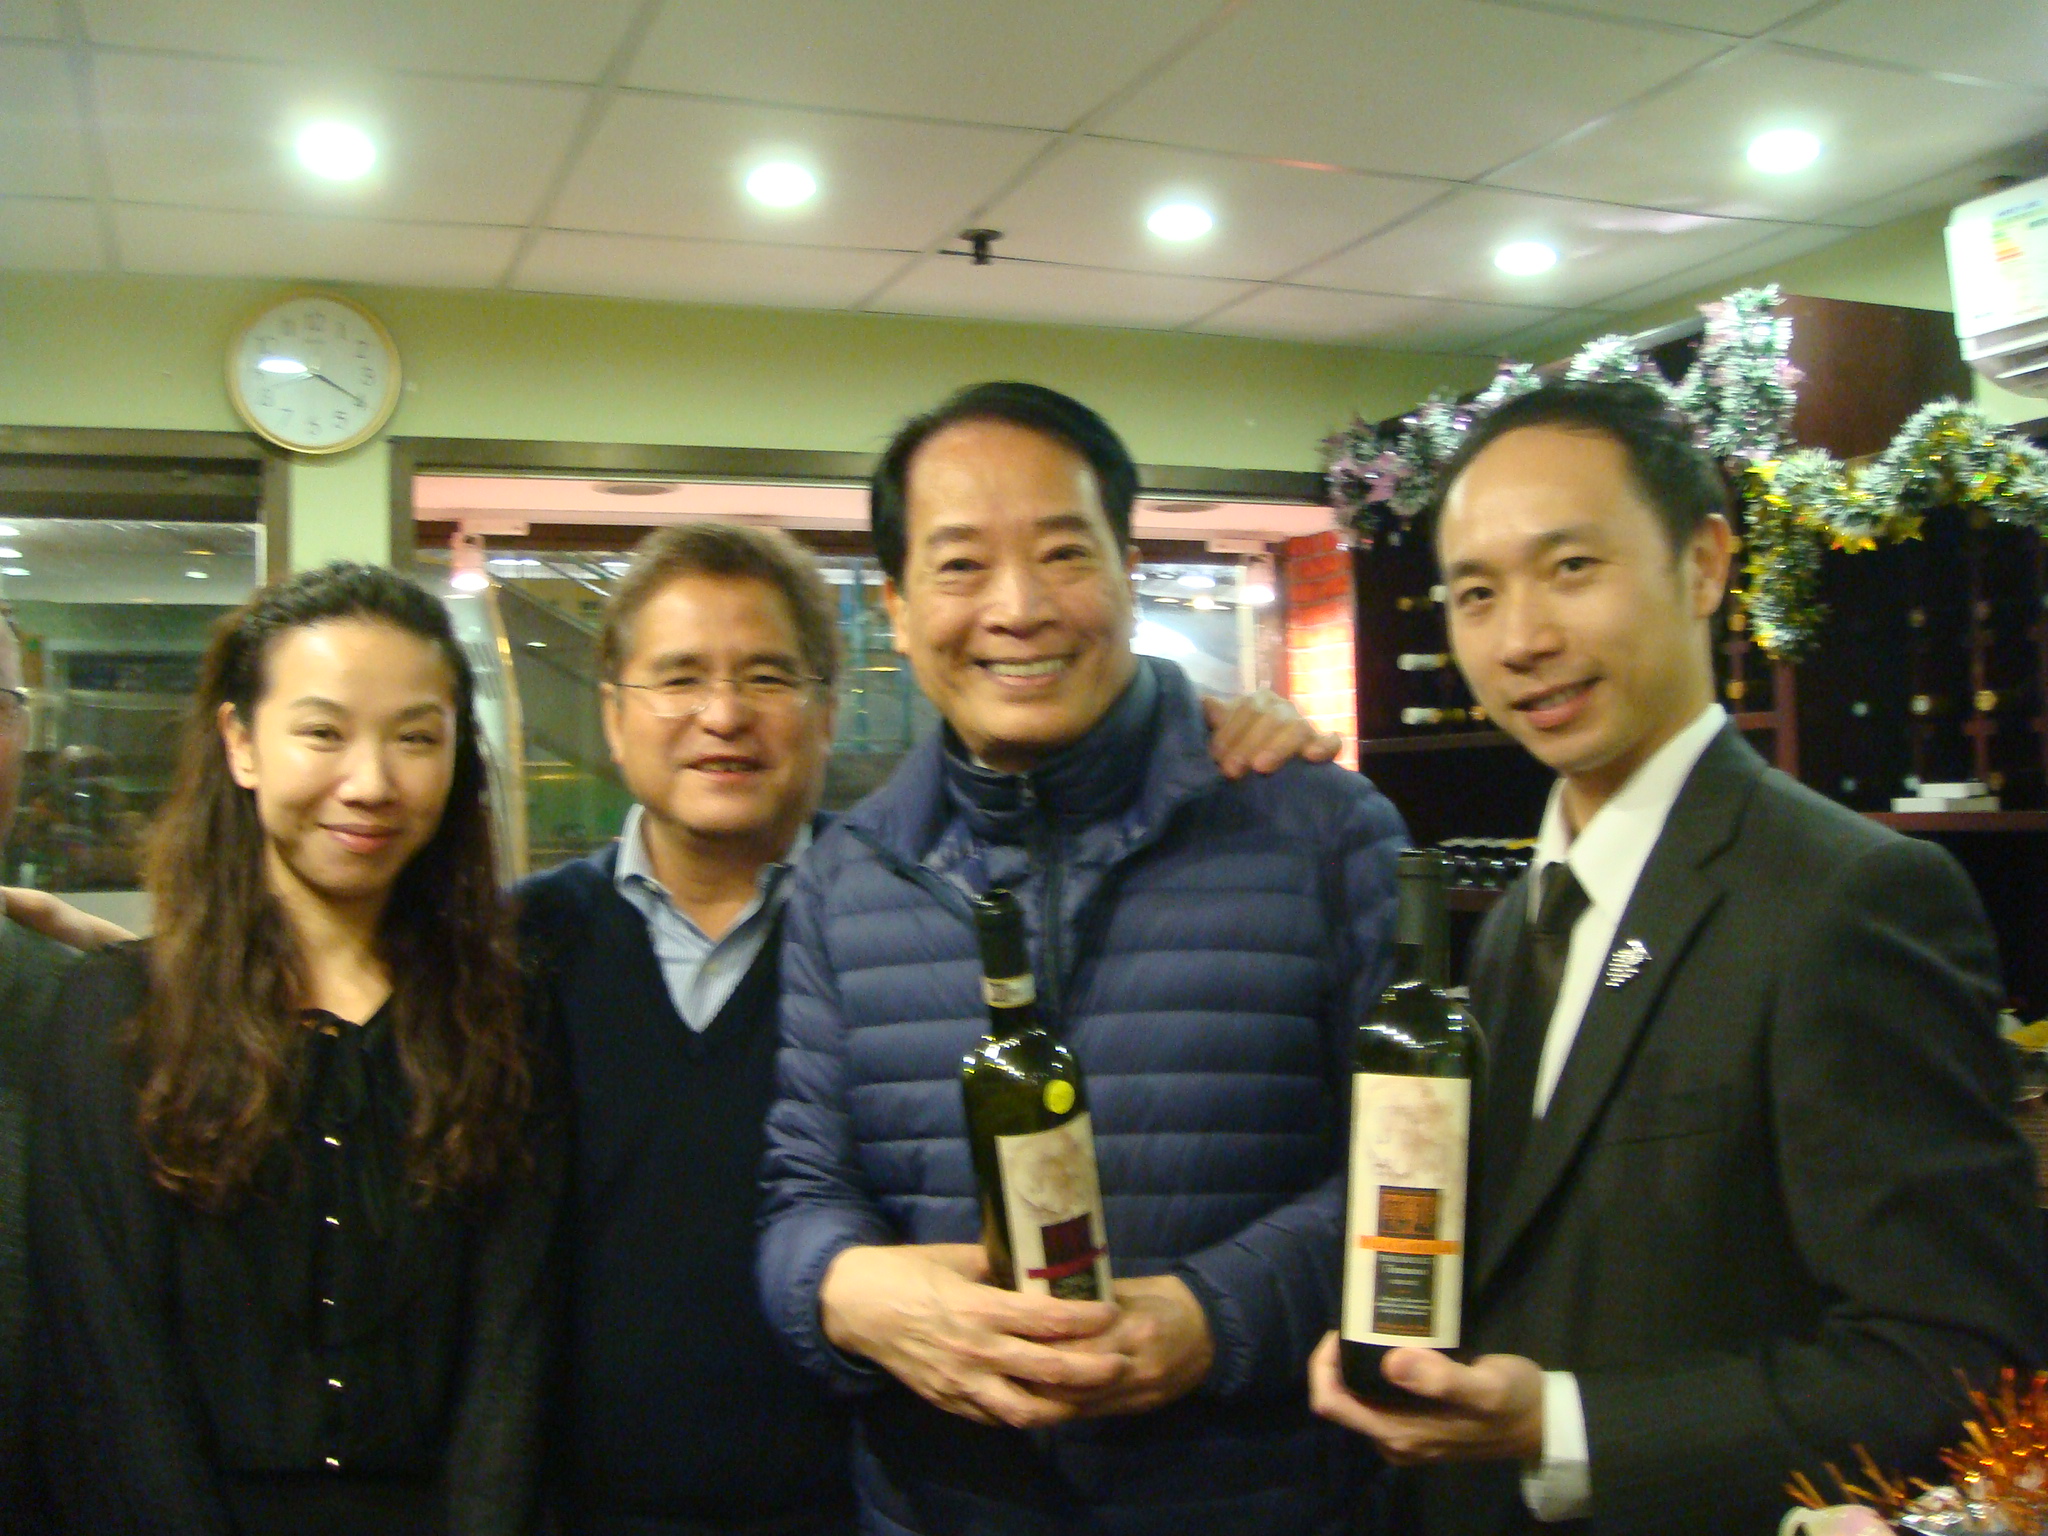   Stephen Ho &amp; Gary Tsui from the Tender Group in Sheung Wan-Hong Kong recently hosted Villa Gabriella organic wines for a tasting with Hong Kong Sommelier-Davy Leung.  